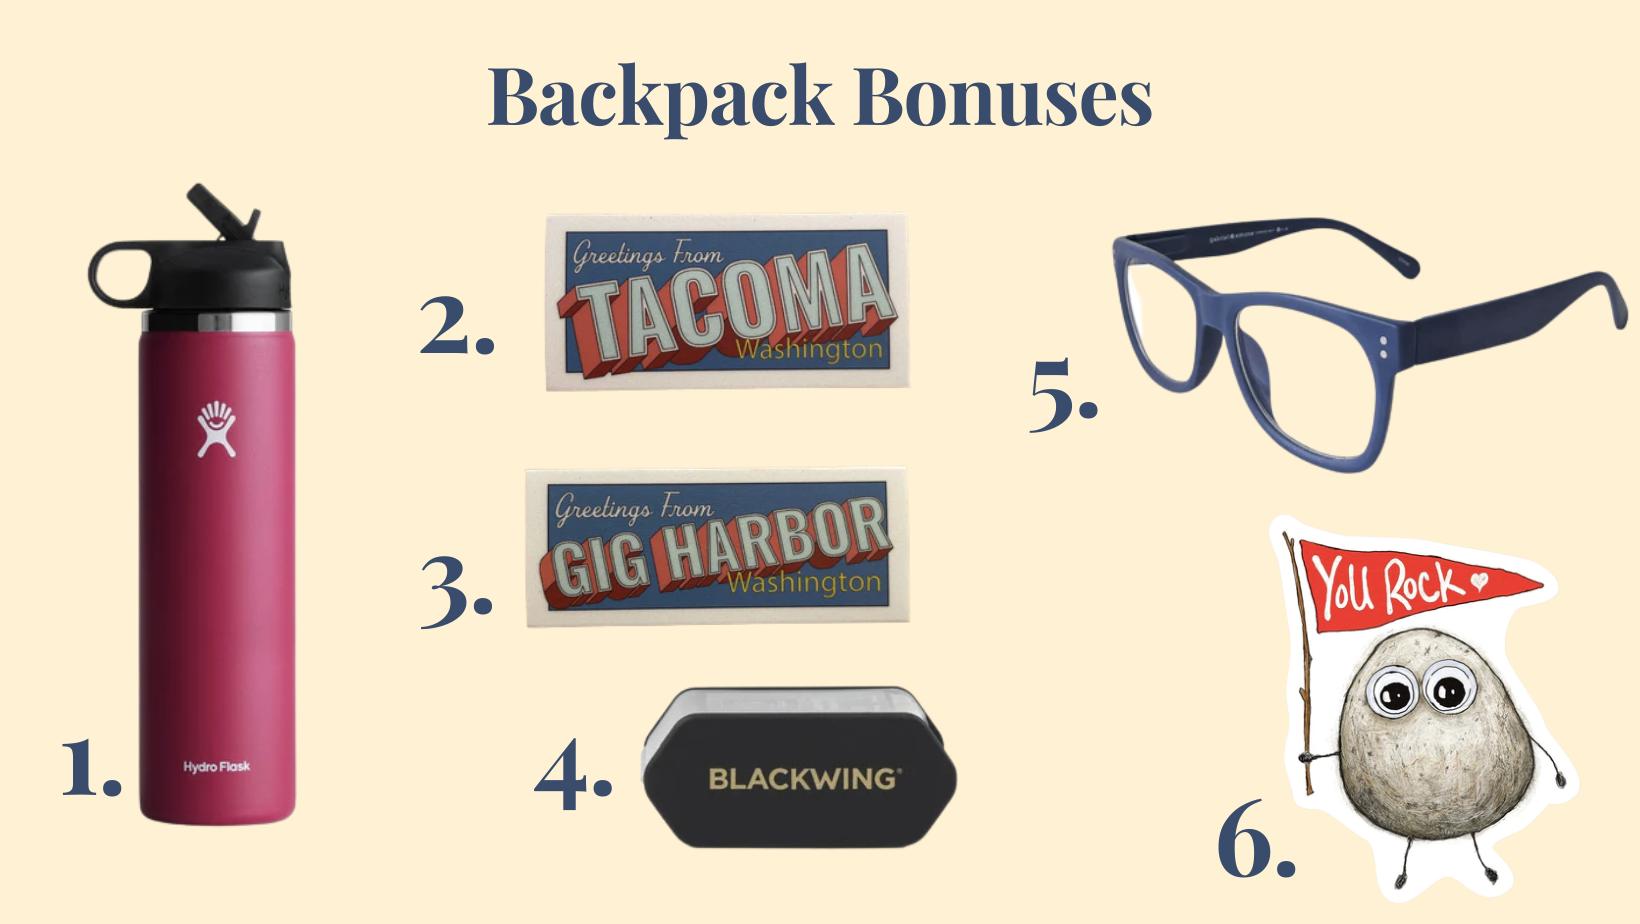 Text says, "Backpack Bonuses." There is a water bottle, sticker, pencil sharpener, blue light glasses, and another sticker on the page. They are: 1. 25 oz Wide Mouth with Straw Lid Hydro Flask Water Bottle  2. Greetings from Tacoma Sticker   3. Greetings from Gig Harbor Sticker  4. Blackwing Two-Step Long Point Sharpener   5. Charlie Blue Light Reading Glasses  6. You Rock Sticker 